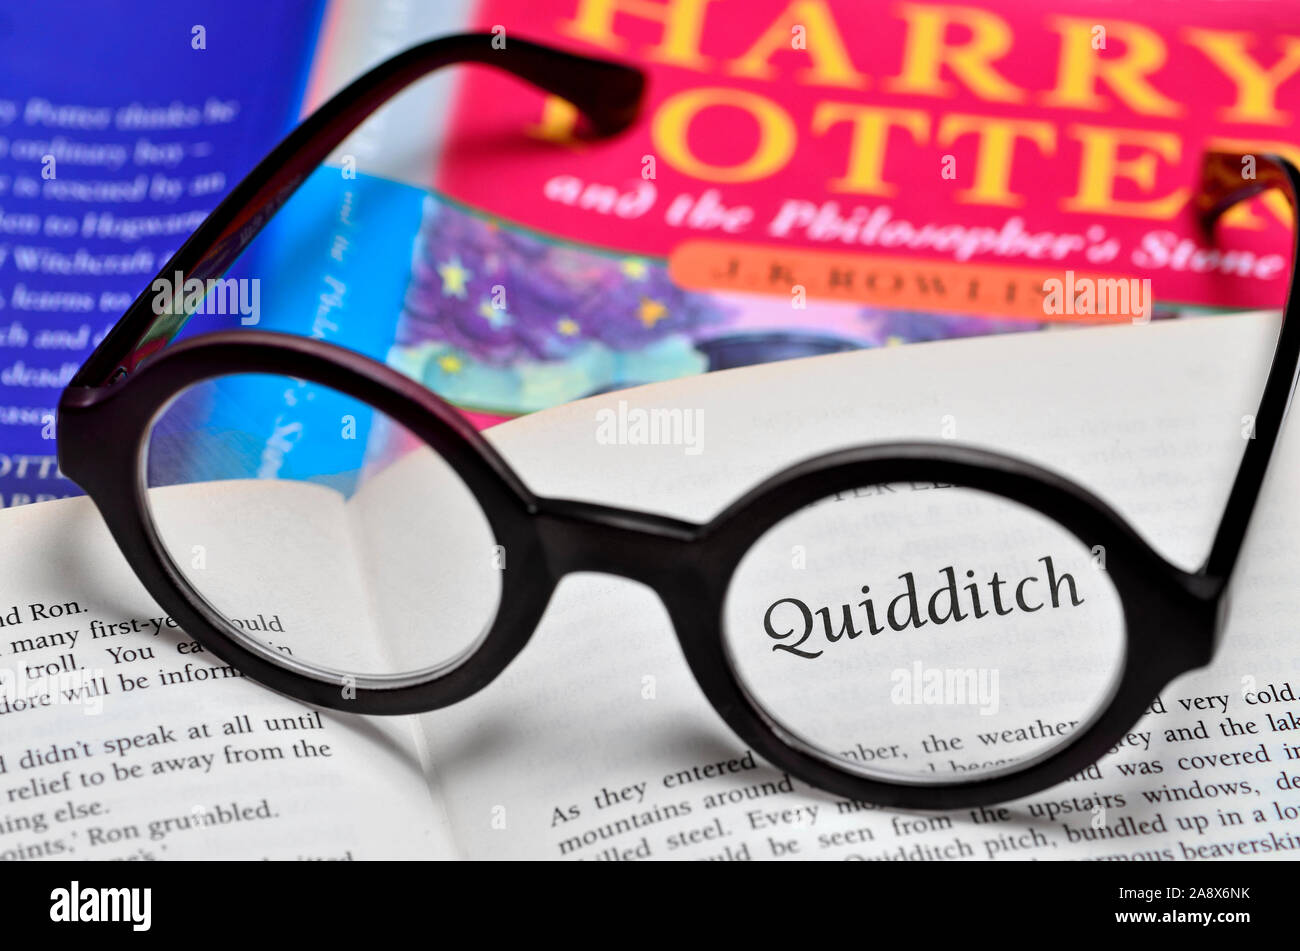 Harry Potter book with Harry Potter glasses Stock Photo